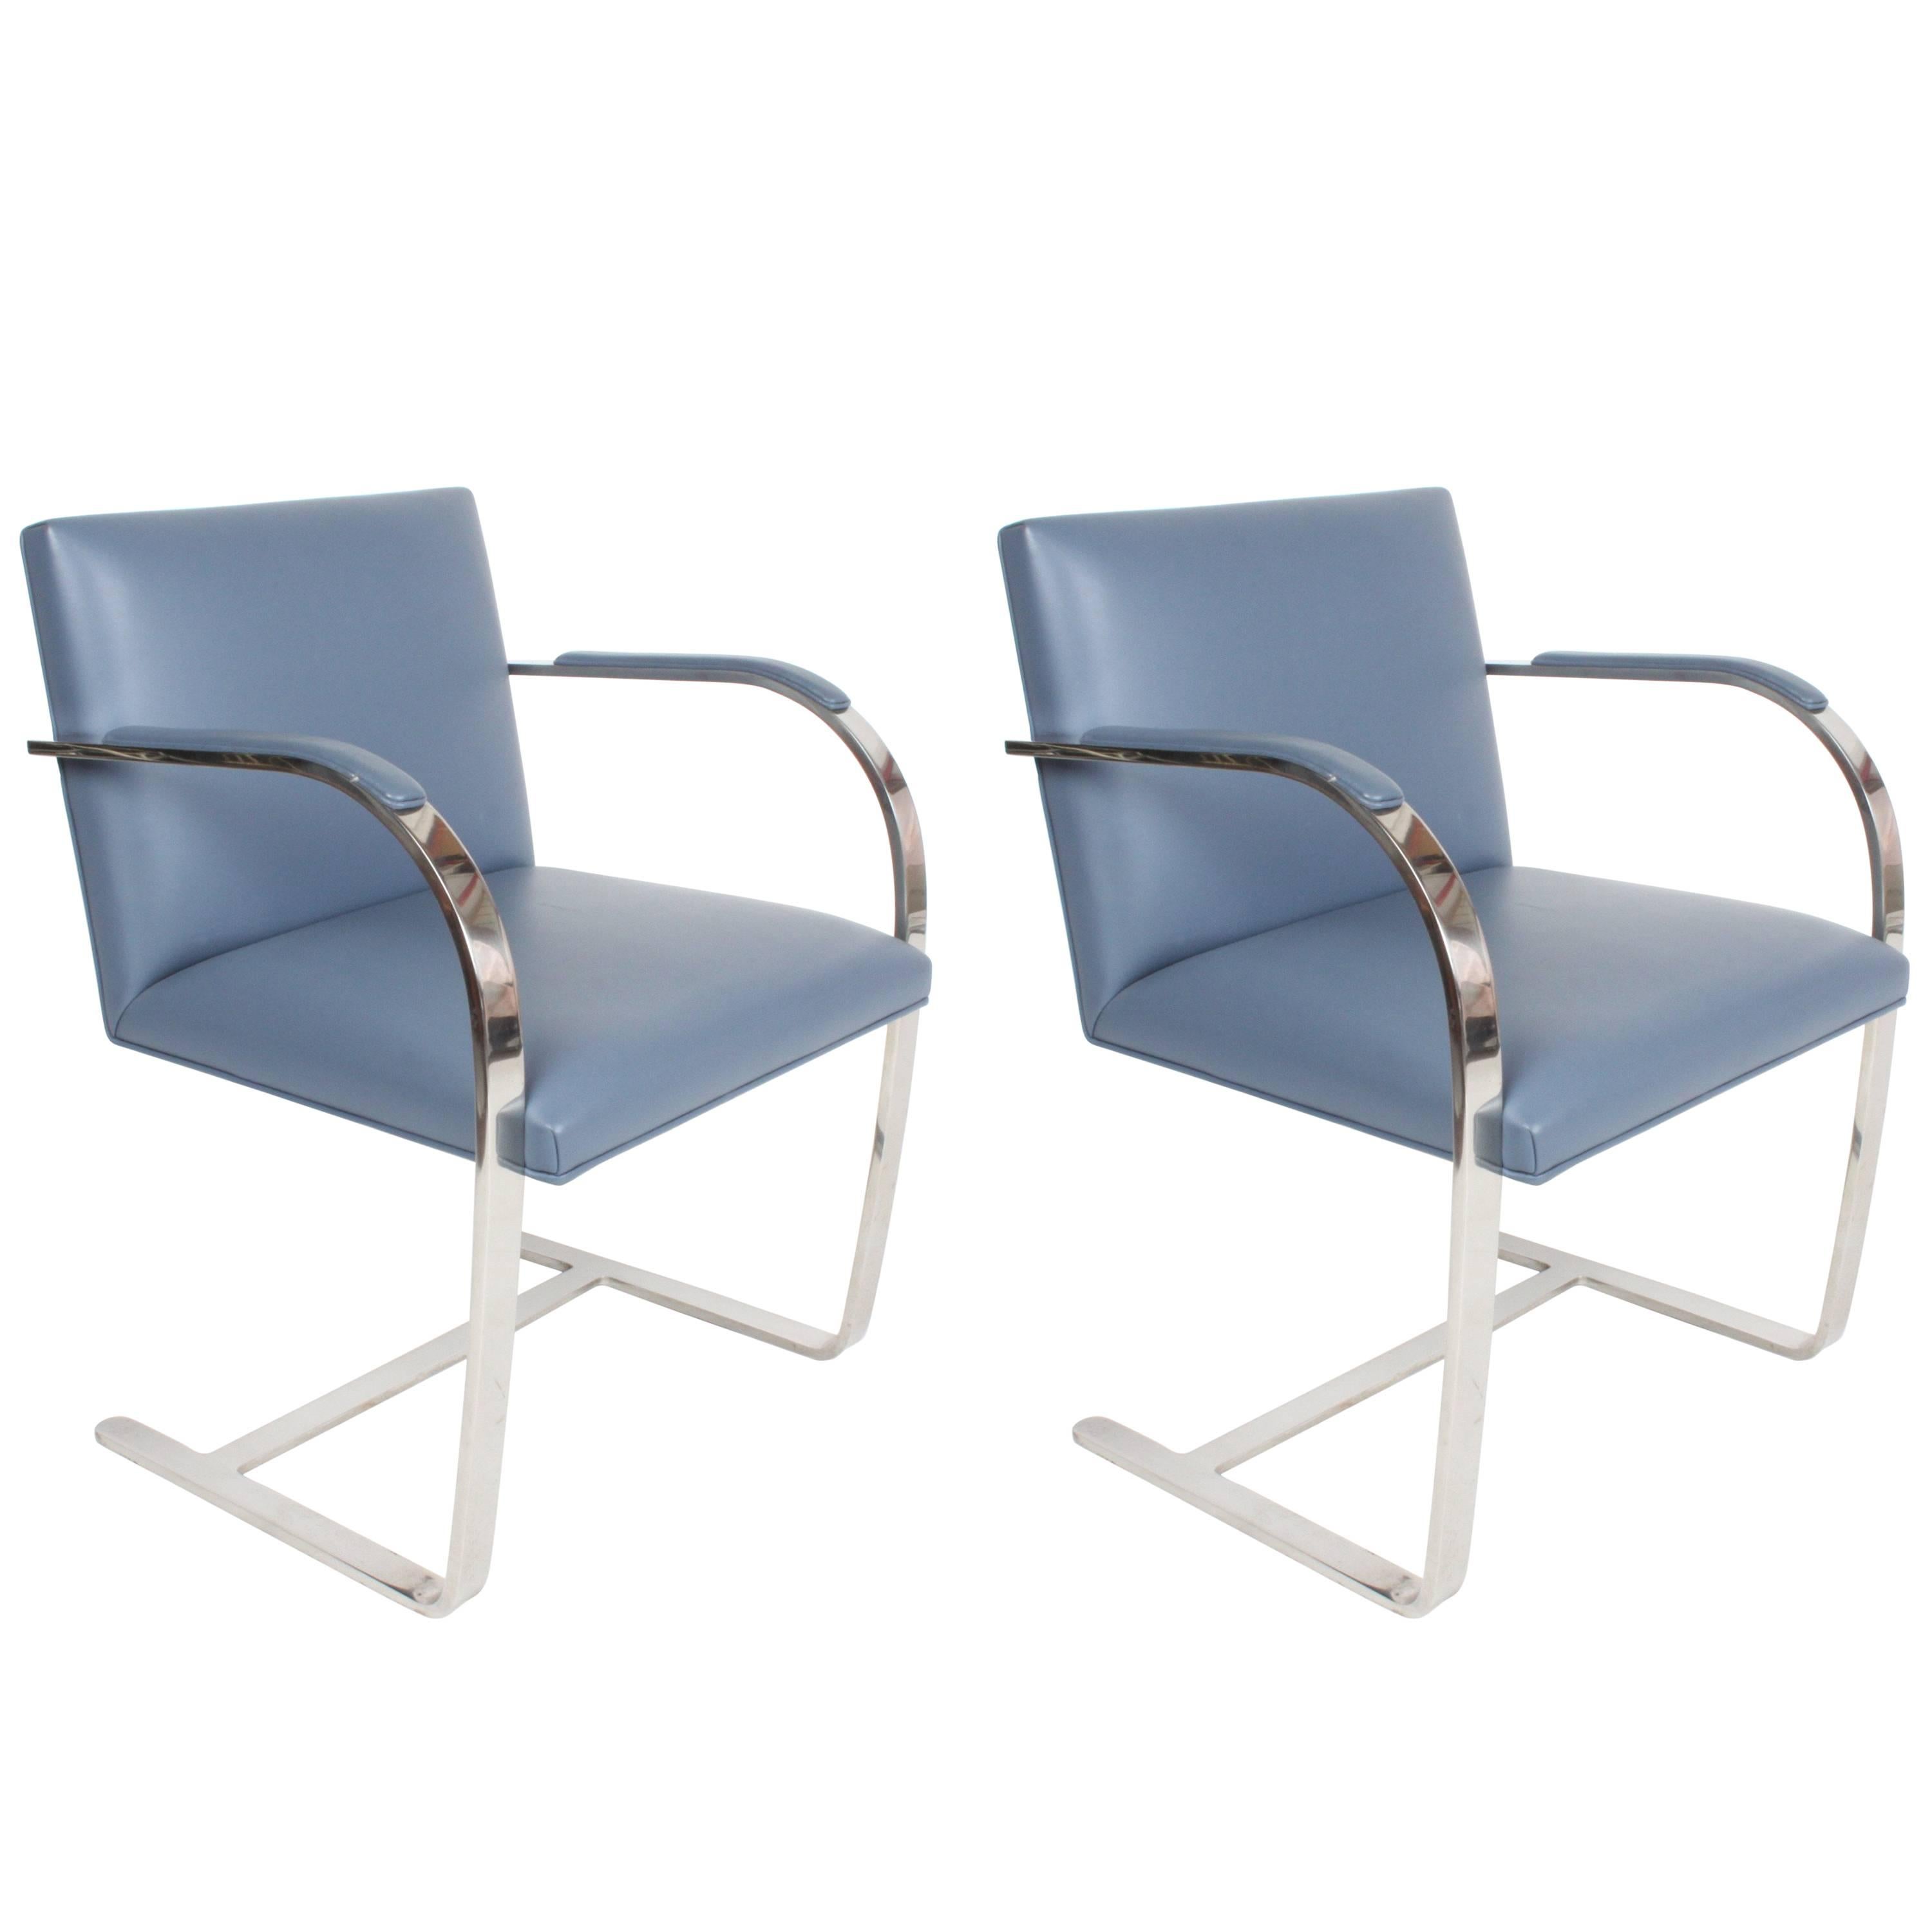 Pair of Mies van der Rohe Flatbar Brno Chairs by Knoll, Stainless